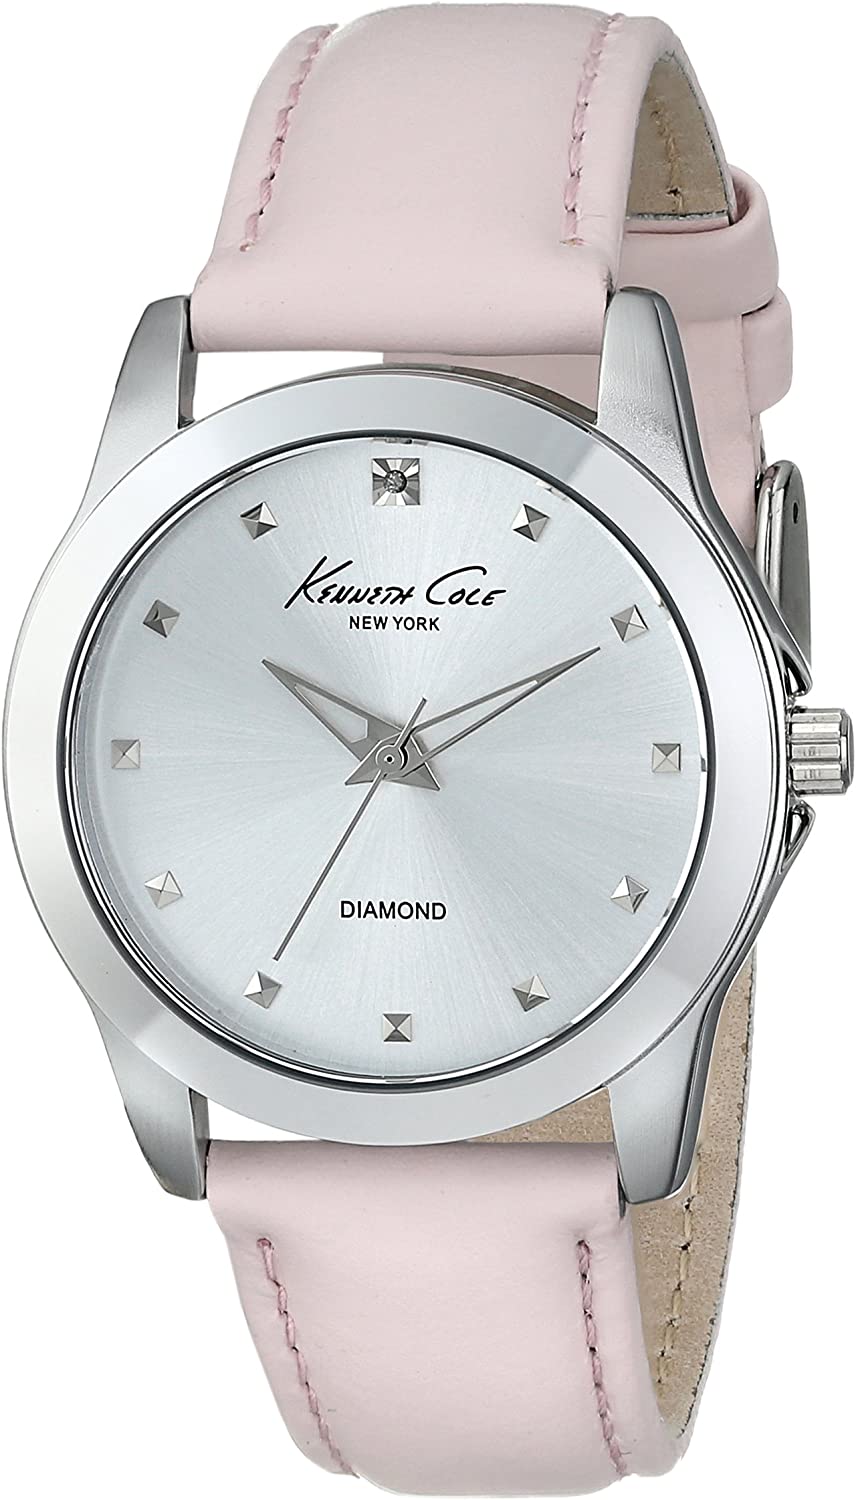 Kenneth Cole New York Women's KC2858 Diamond Accented Stainless Steel Watch With Pink Leather Band - 3alababak